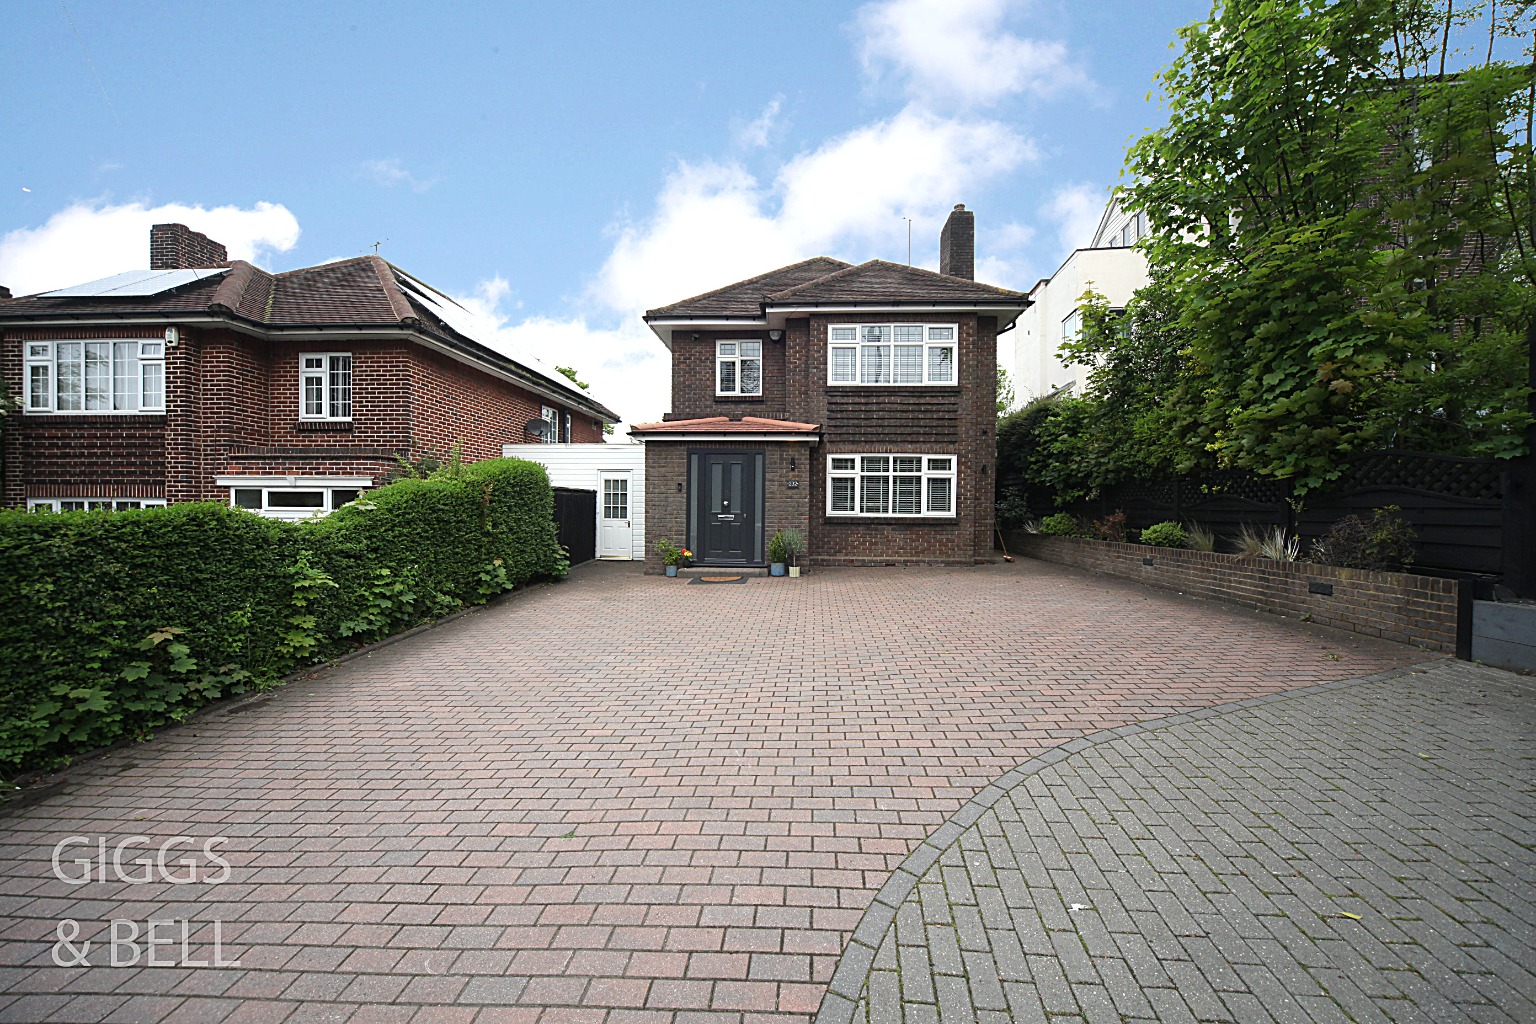 4 bed detached house for sale in Stockingstone Road, Luton  - Property Image 1